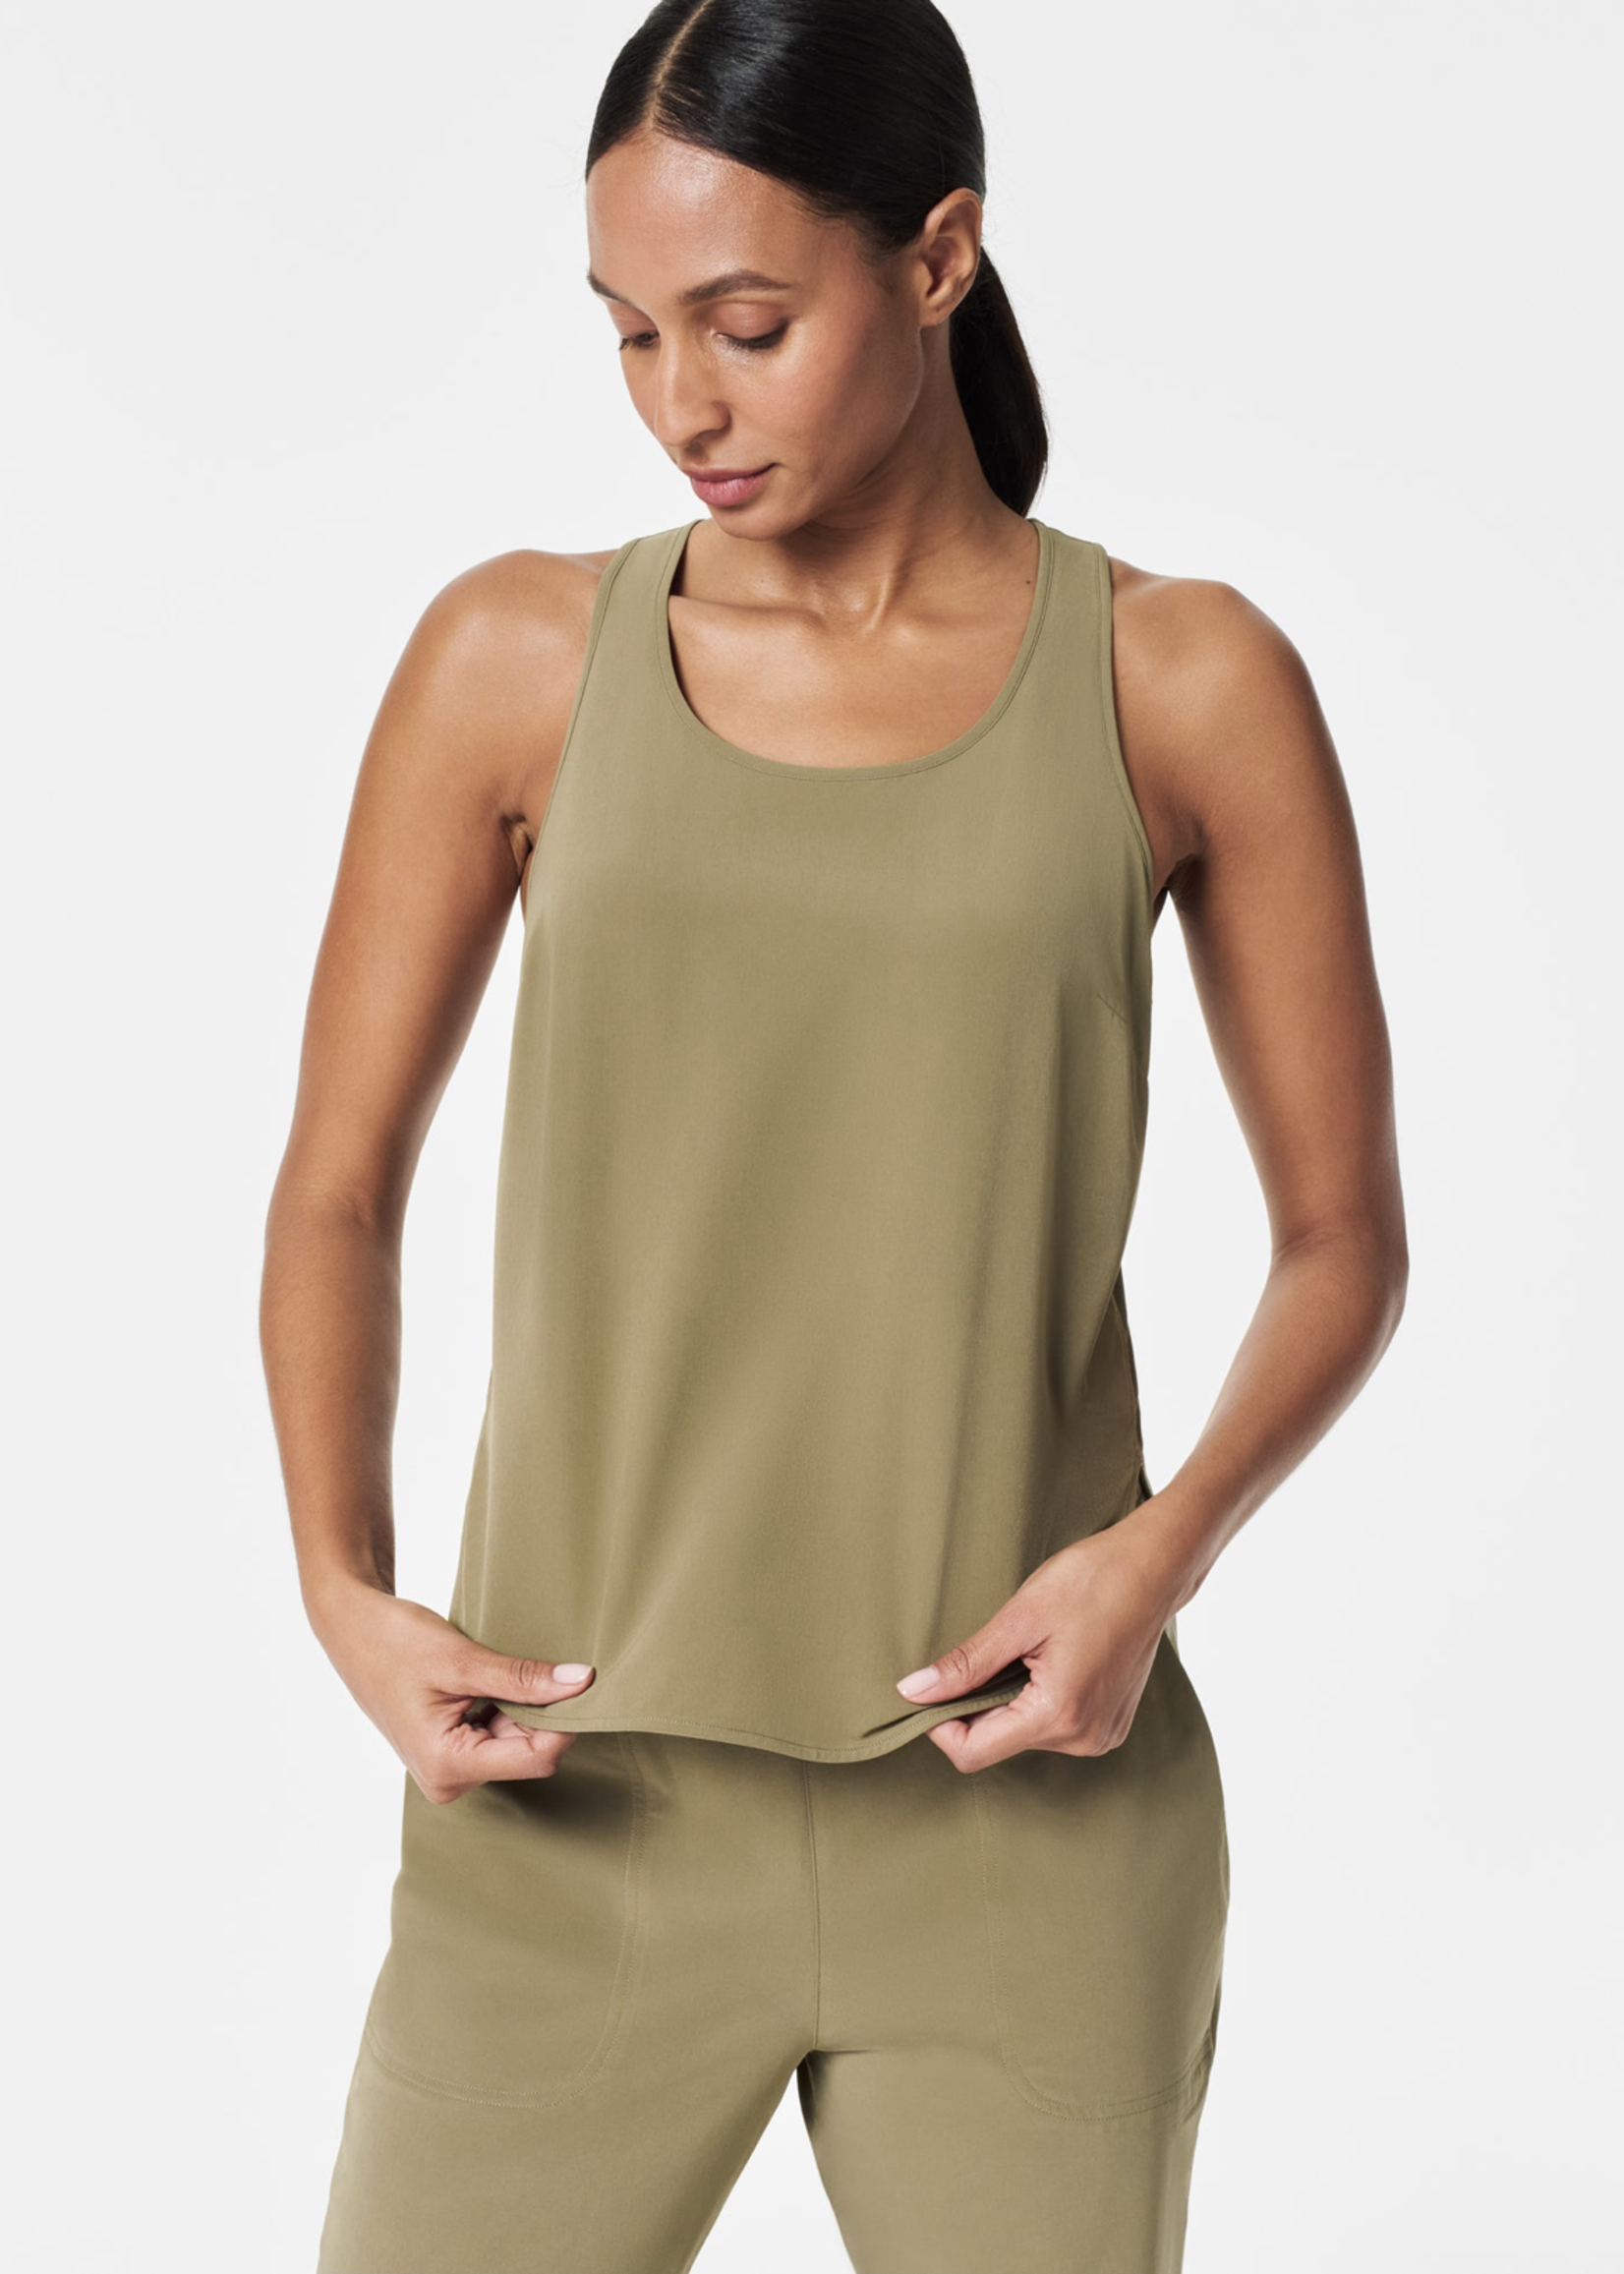 SPANX CASUAL FRIDAYS CURVED HEM TANK TOP - Beaufort